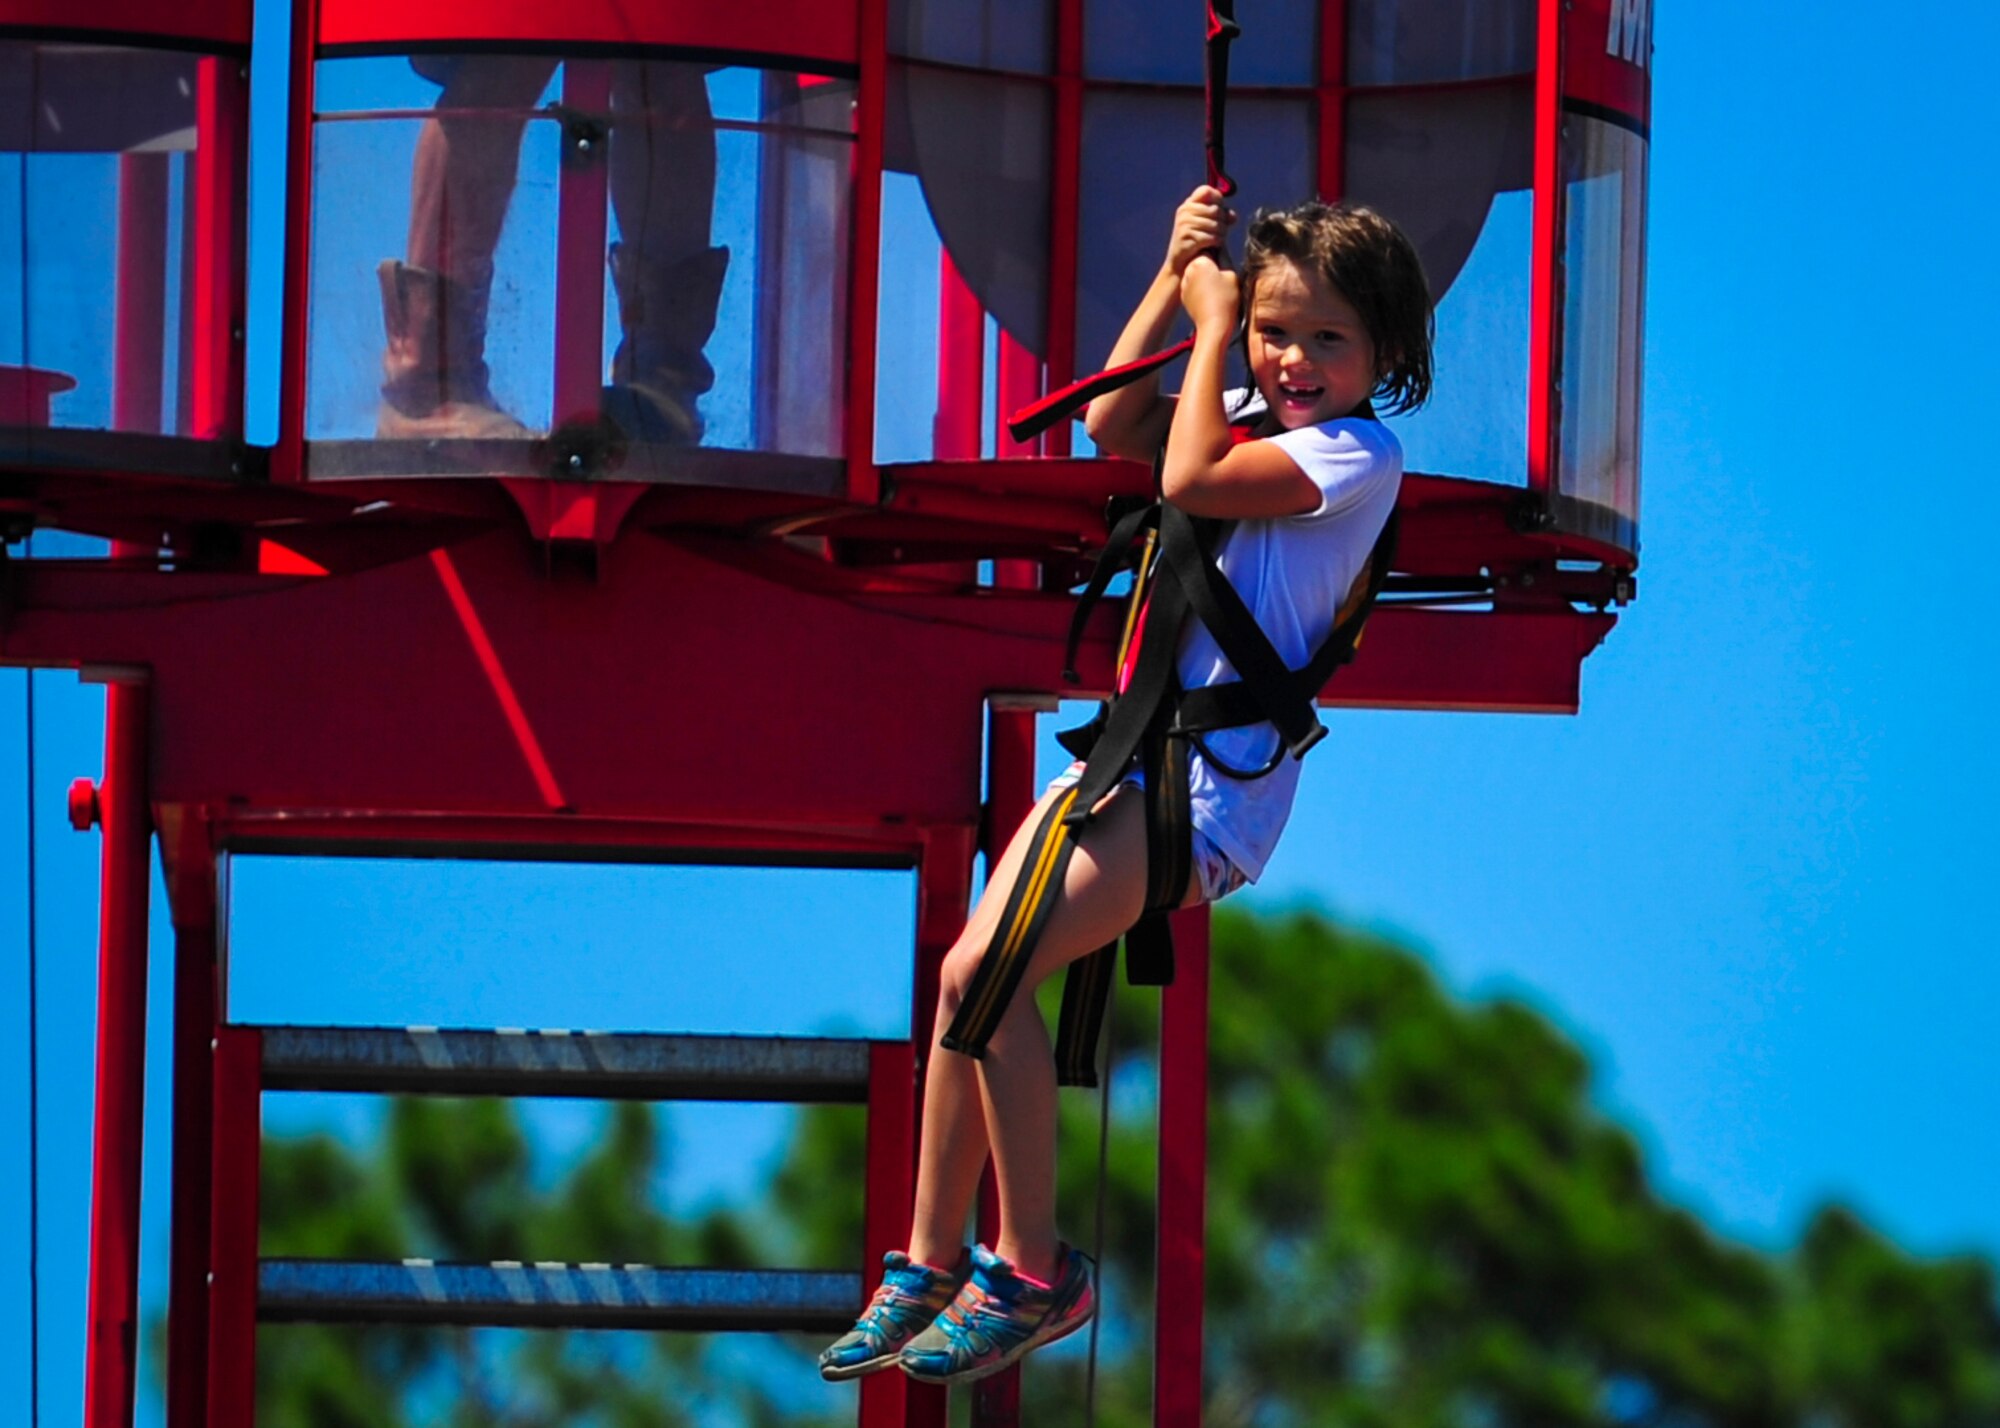 A child ziplines during the Sound of Independence at Hurlburt Field, Fla., June 24, 2016. For more than two decades, the Sound of Independence has traditionally been celebrated the Friday before Independence Day. (U.S. Air Force photo by Airman 1st Class Joseph Pick)